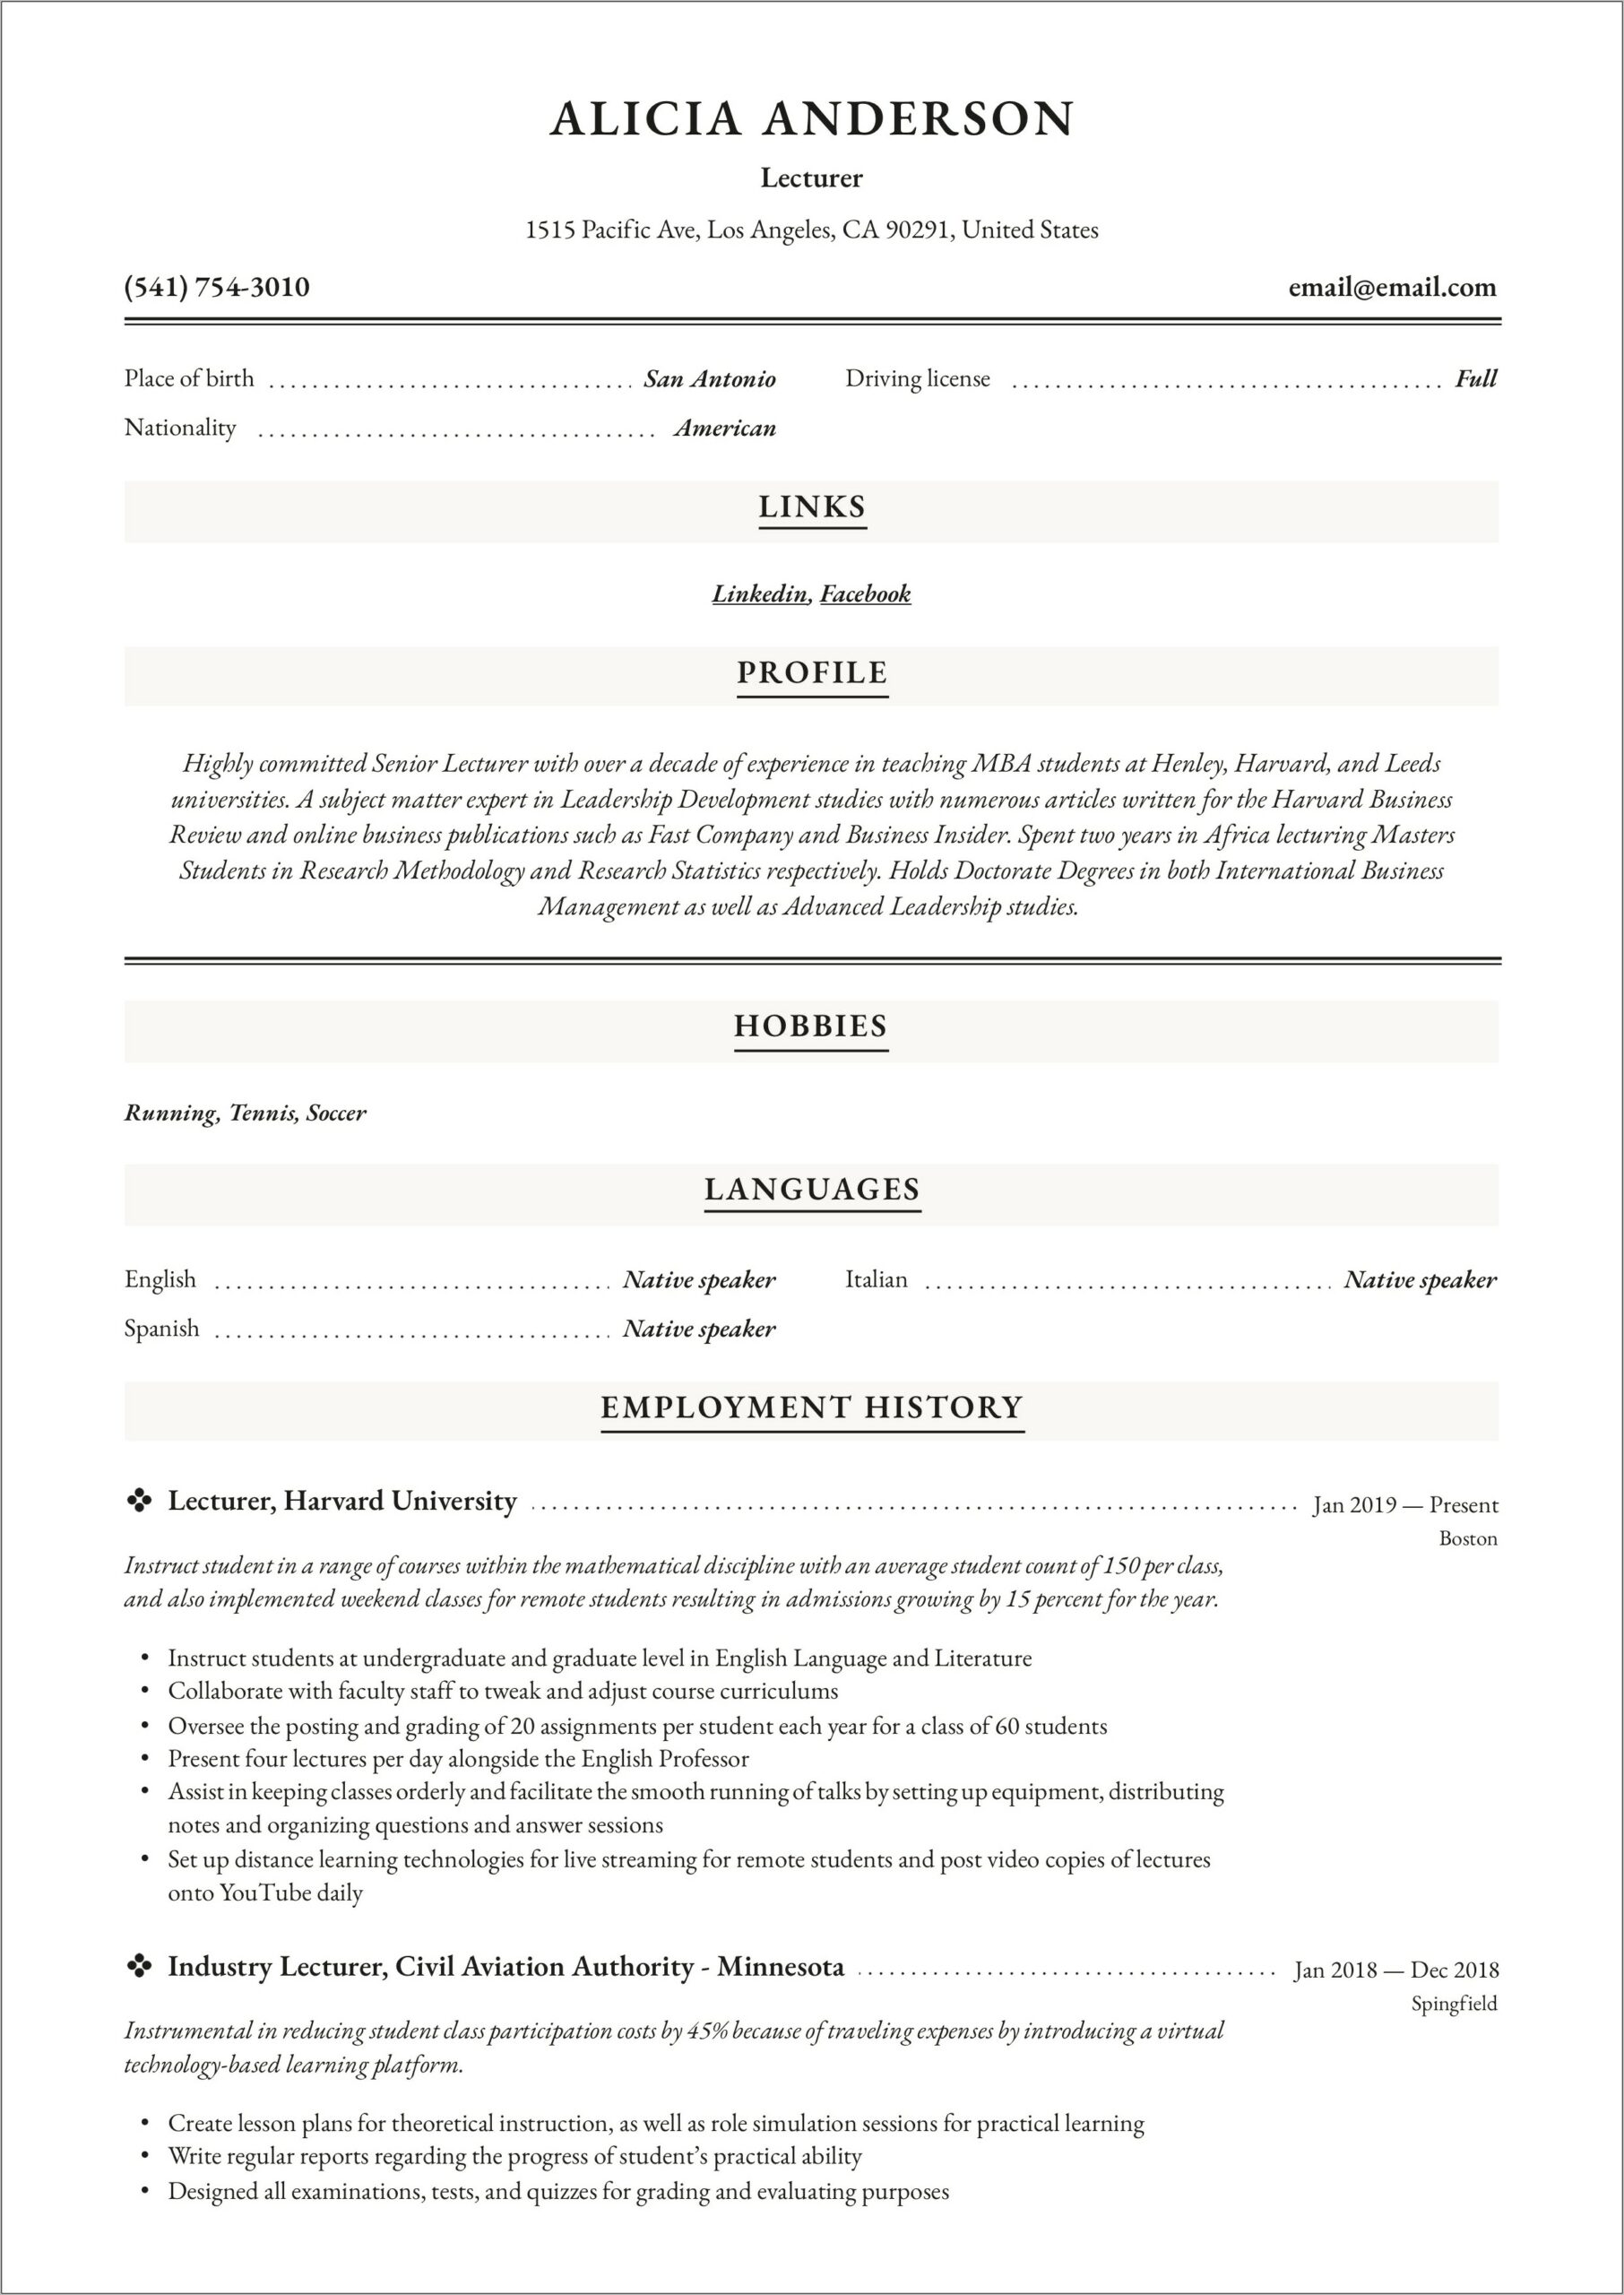 Resume Sample For Lecturer In Mba